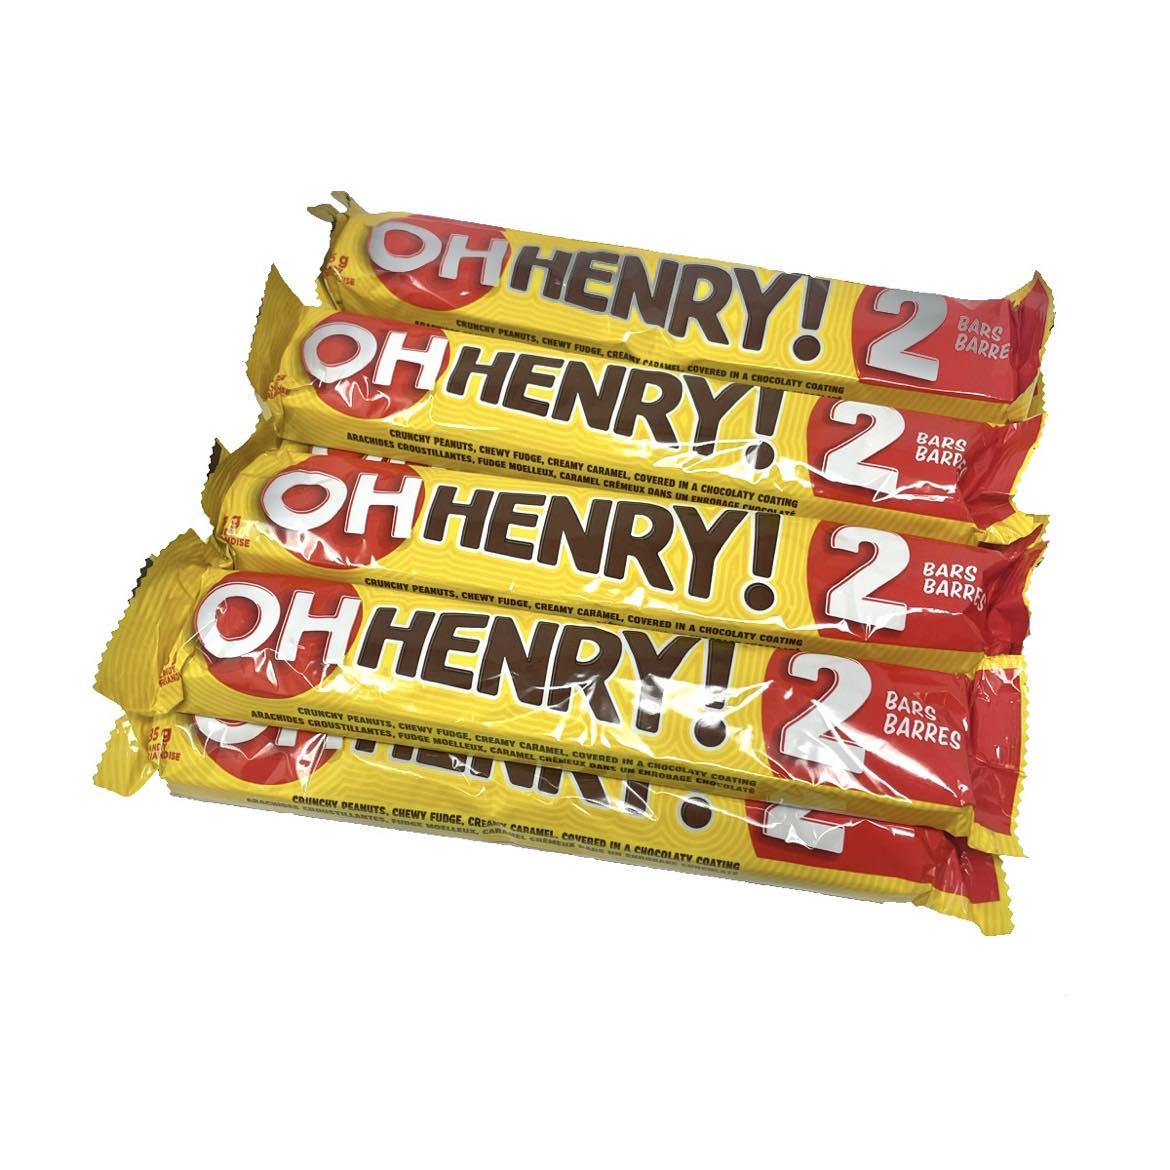 Oh Henry King Size (85g)